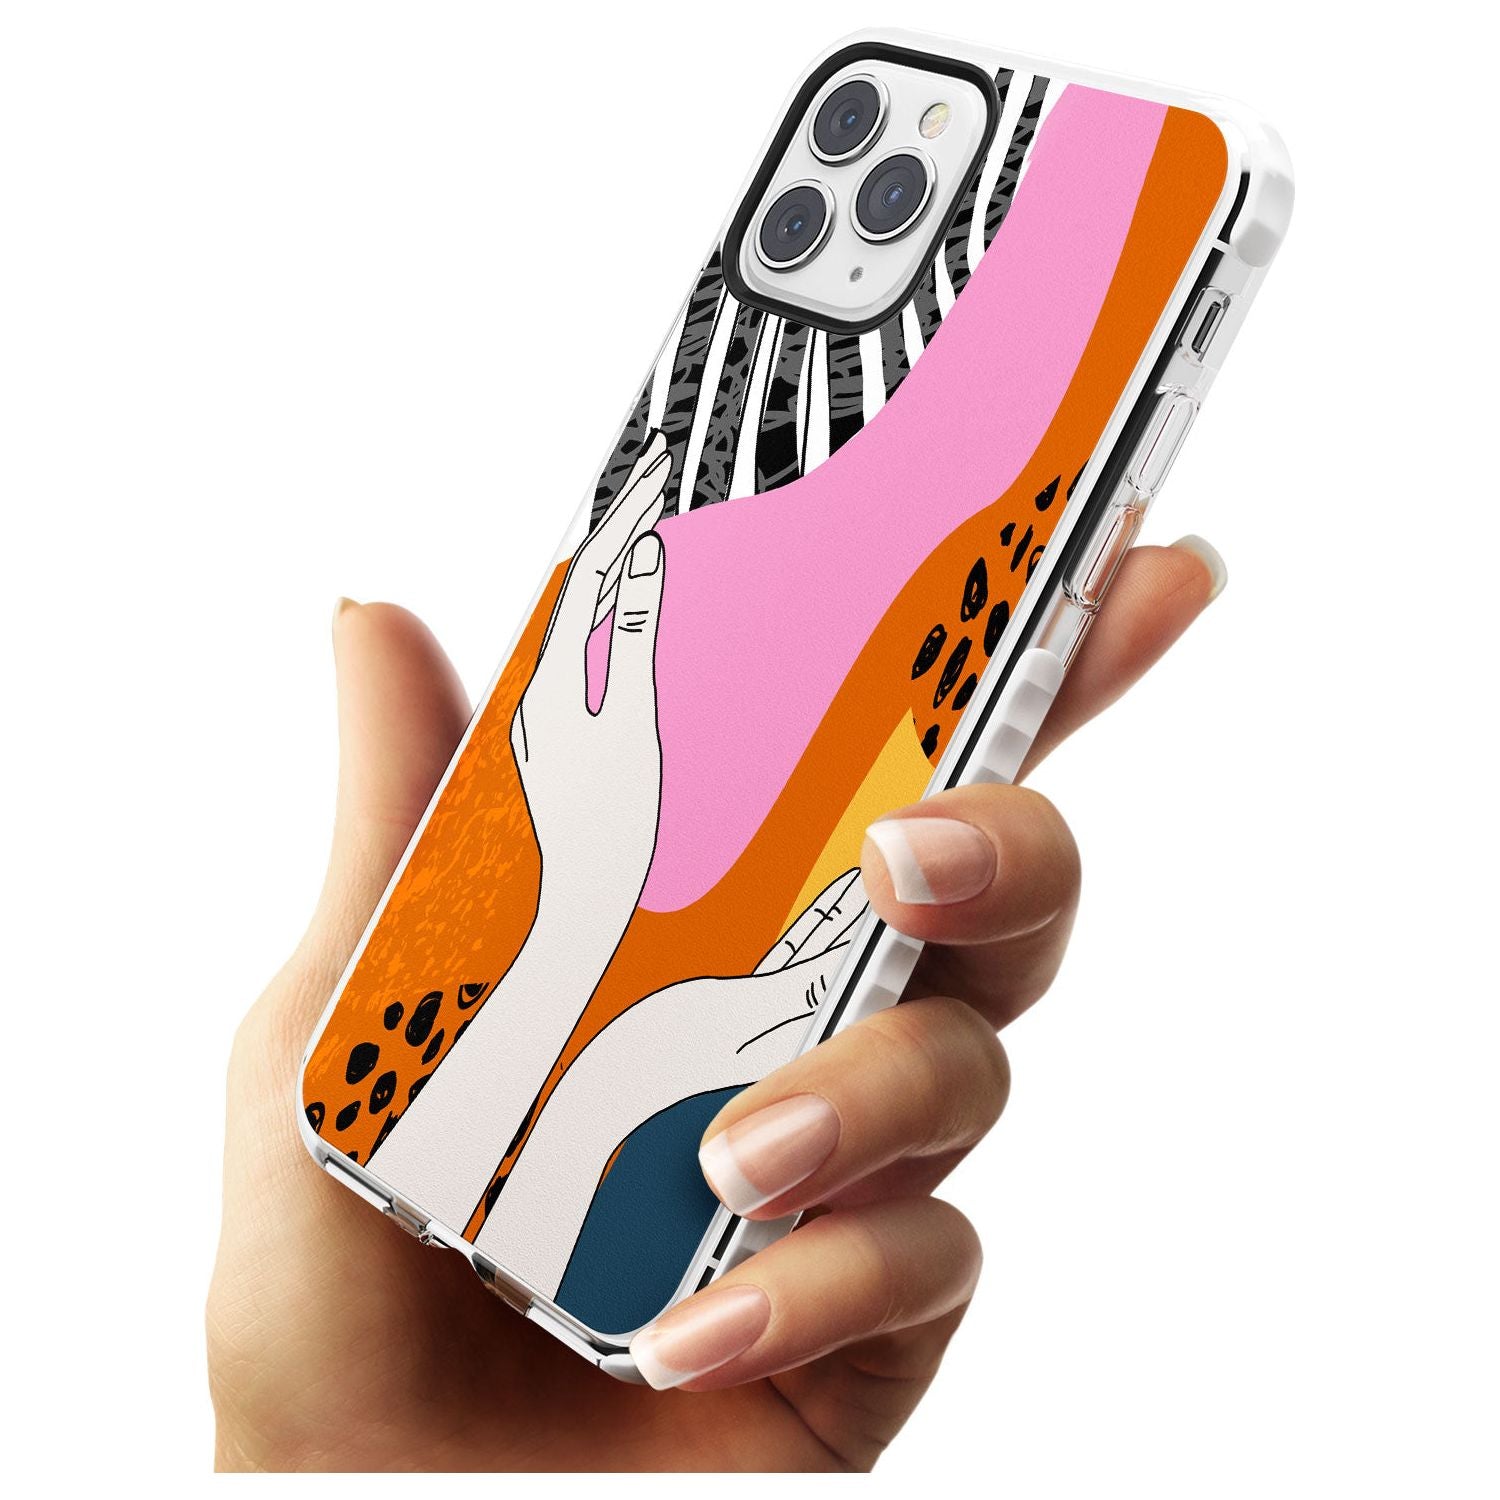 Catching Feels Slim TPU Phone Case for iPhone 11 Pro Max